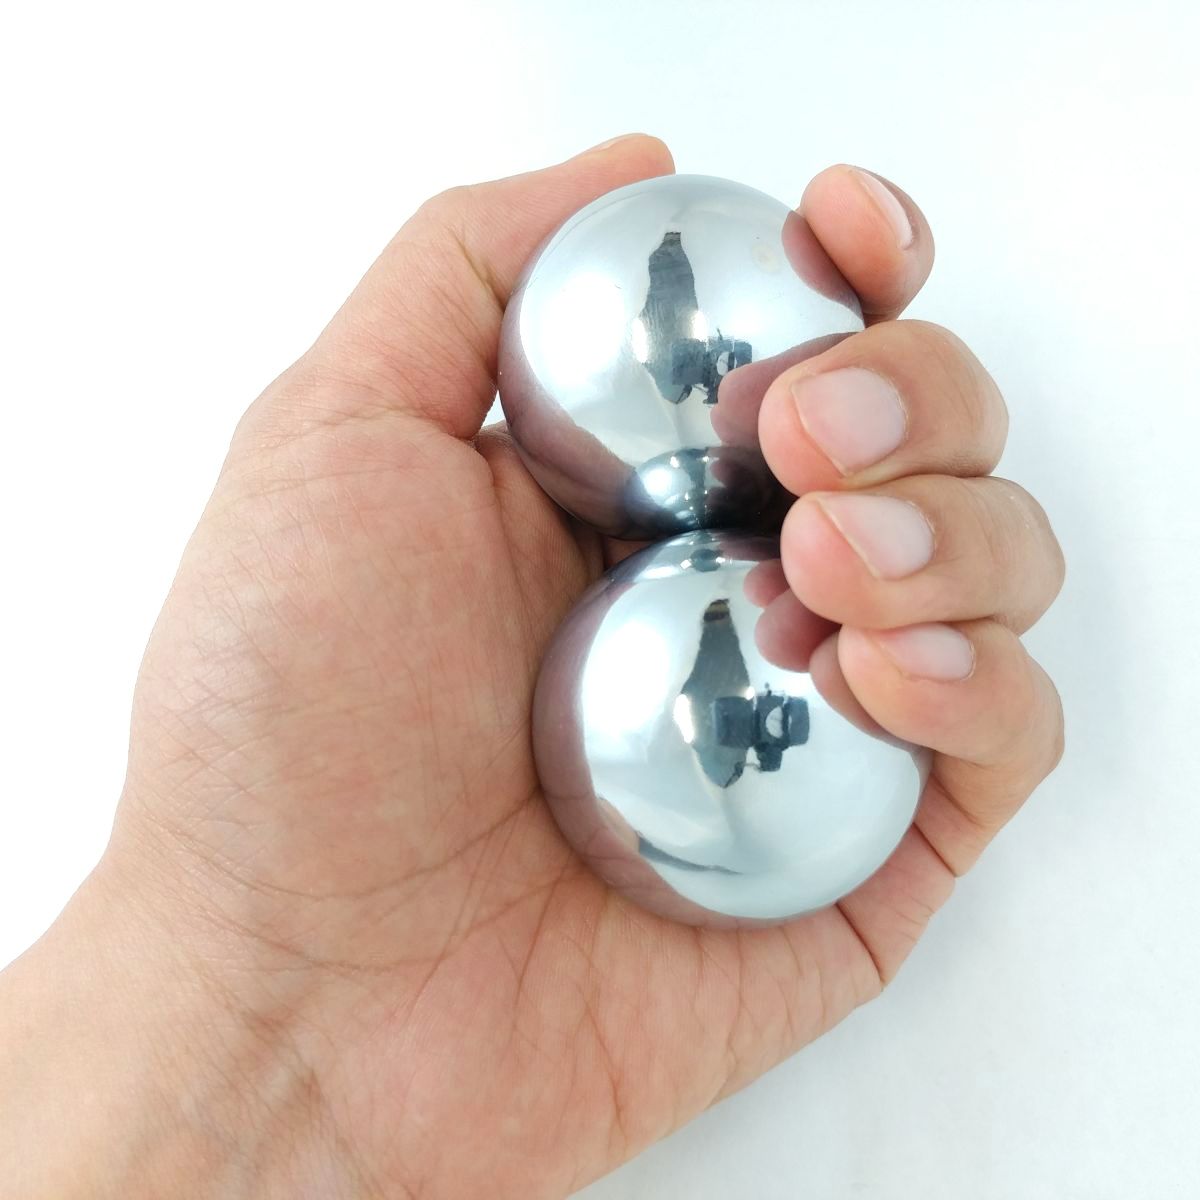 Baoding Balls Solid Stainless Steel 60mm 2pcs For Wrist Strengthening Relaxation 